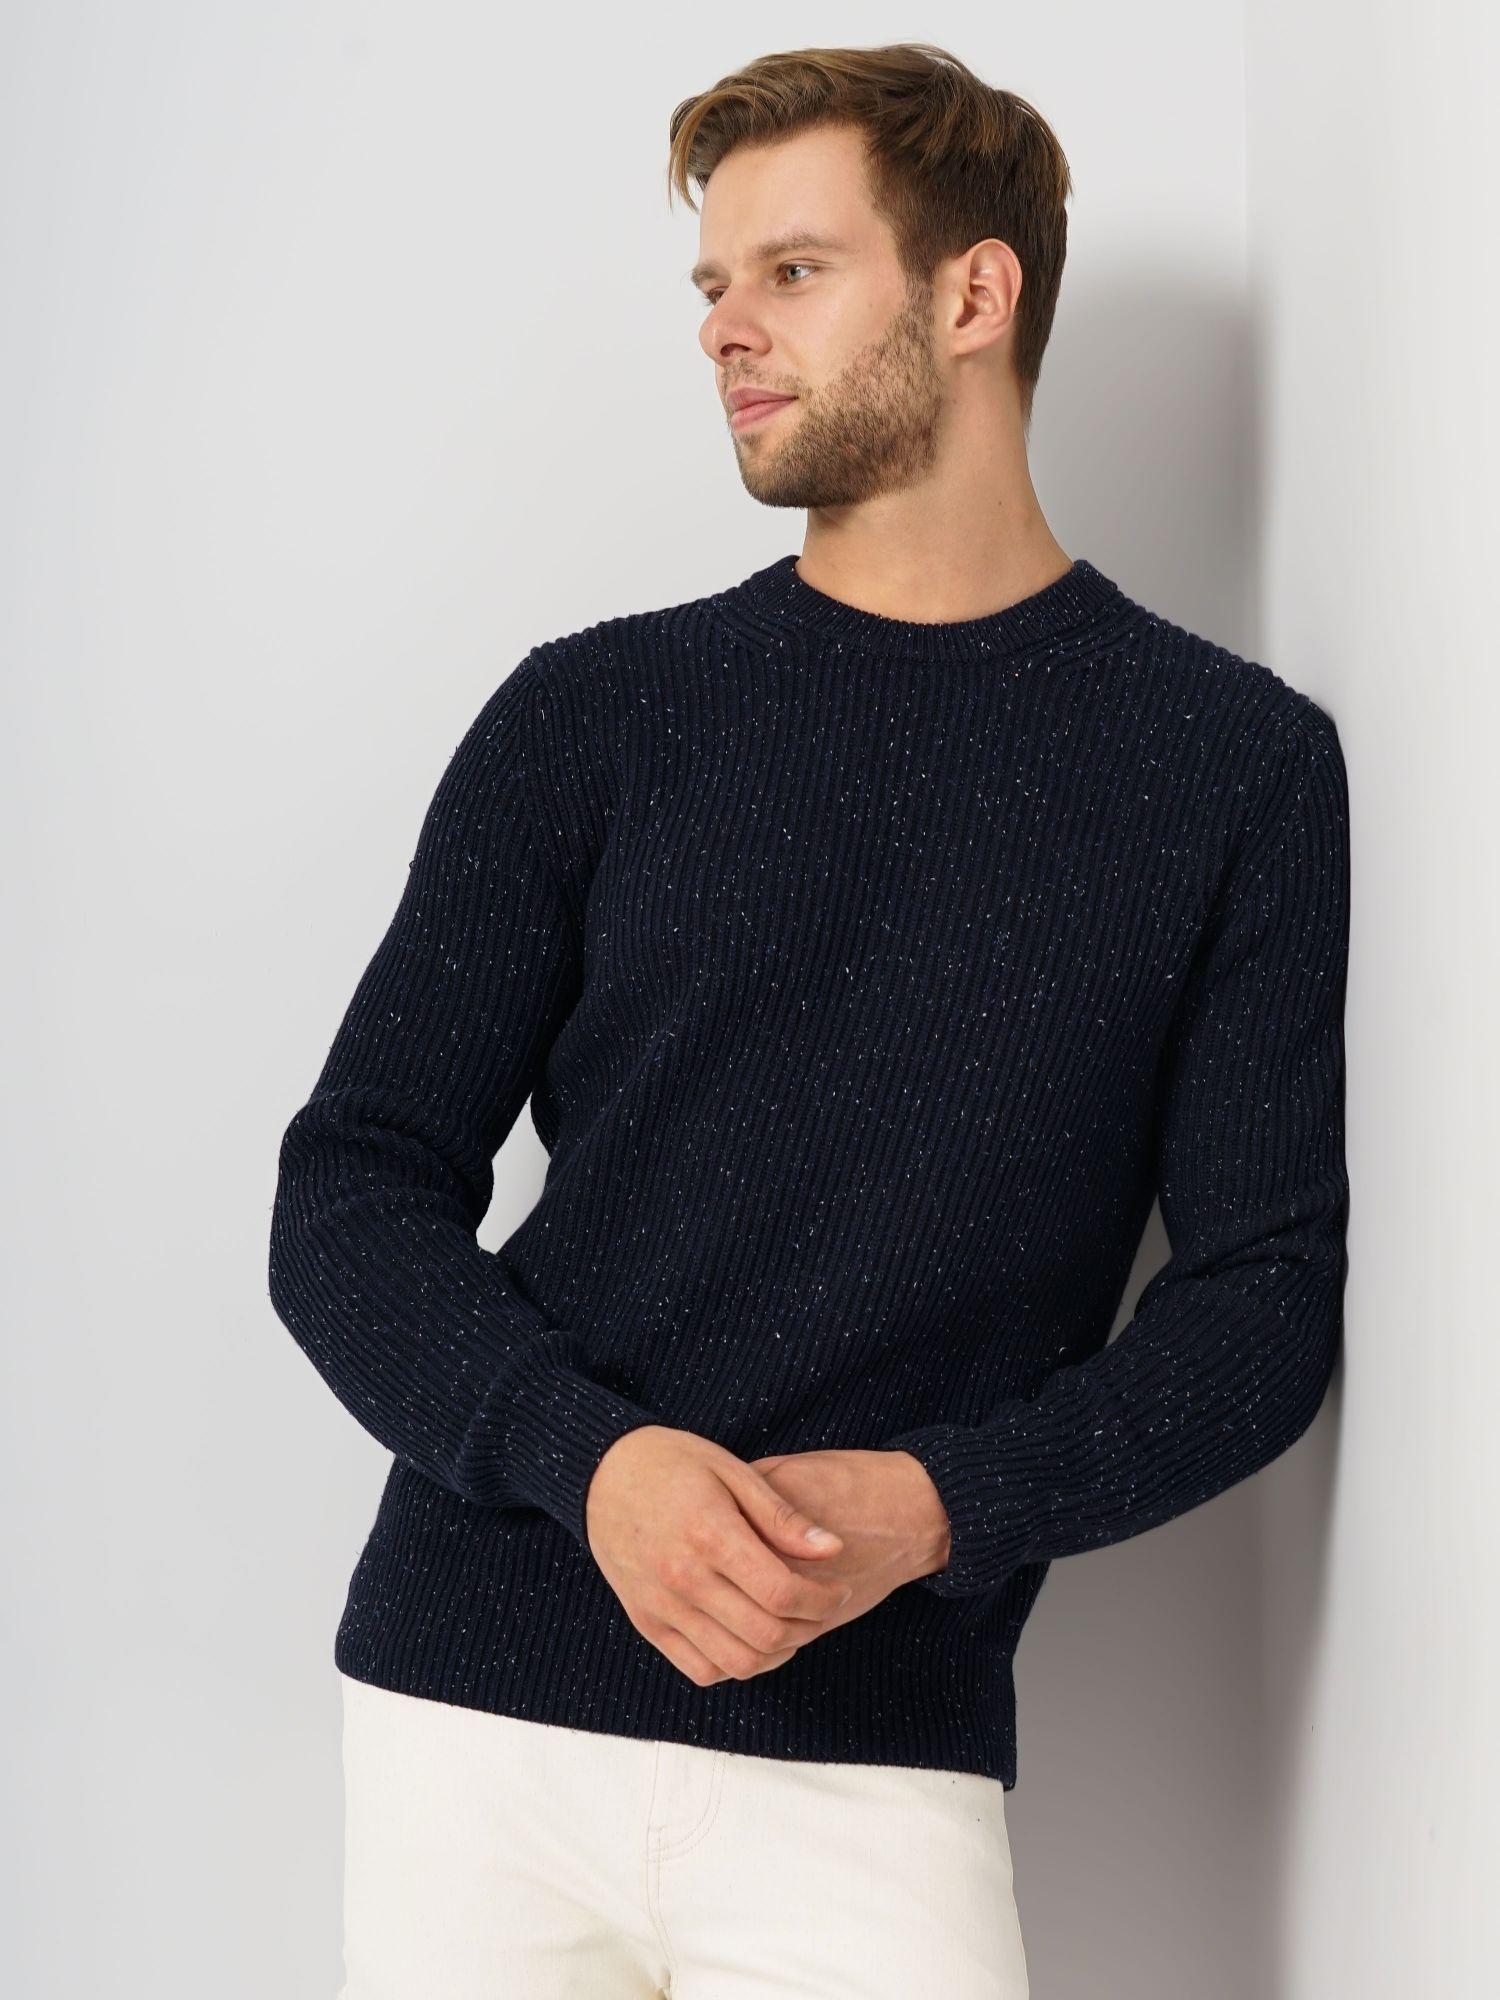 mens-textured-sweater